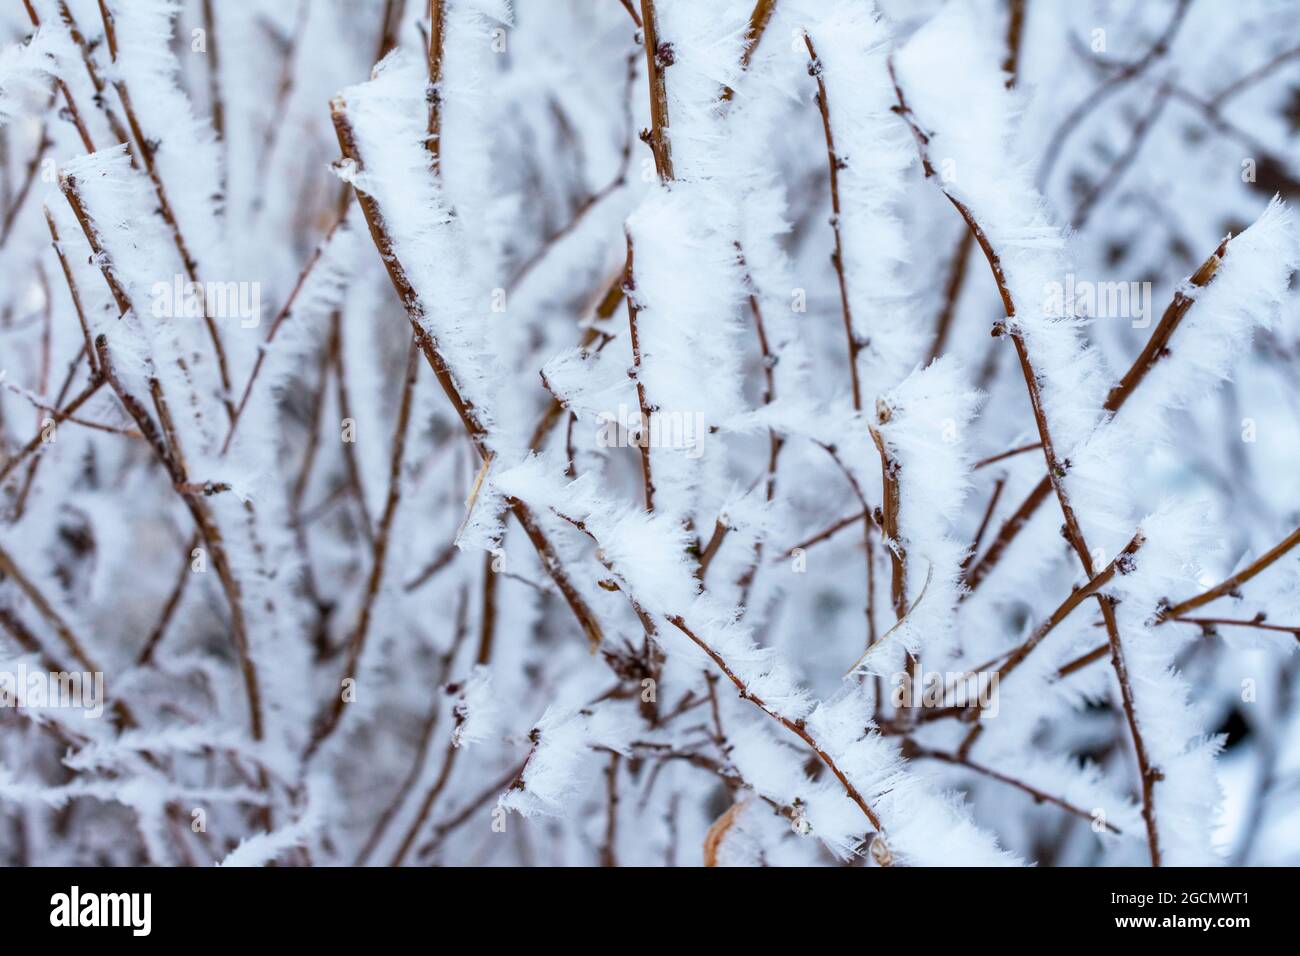 Hoar Frost on Tree Branches Winter Scene Stock Photo